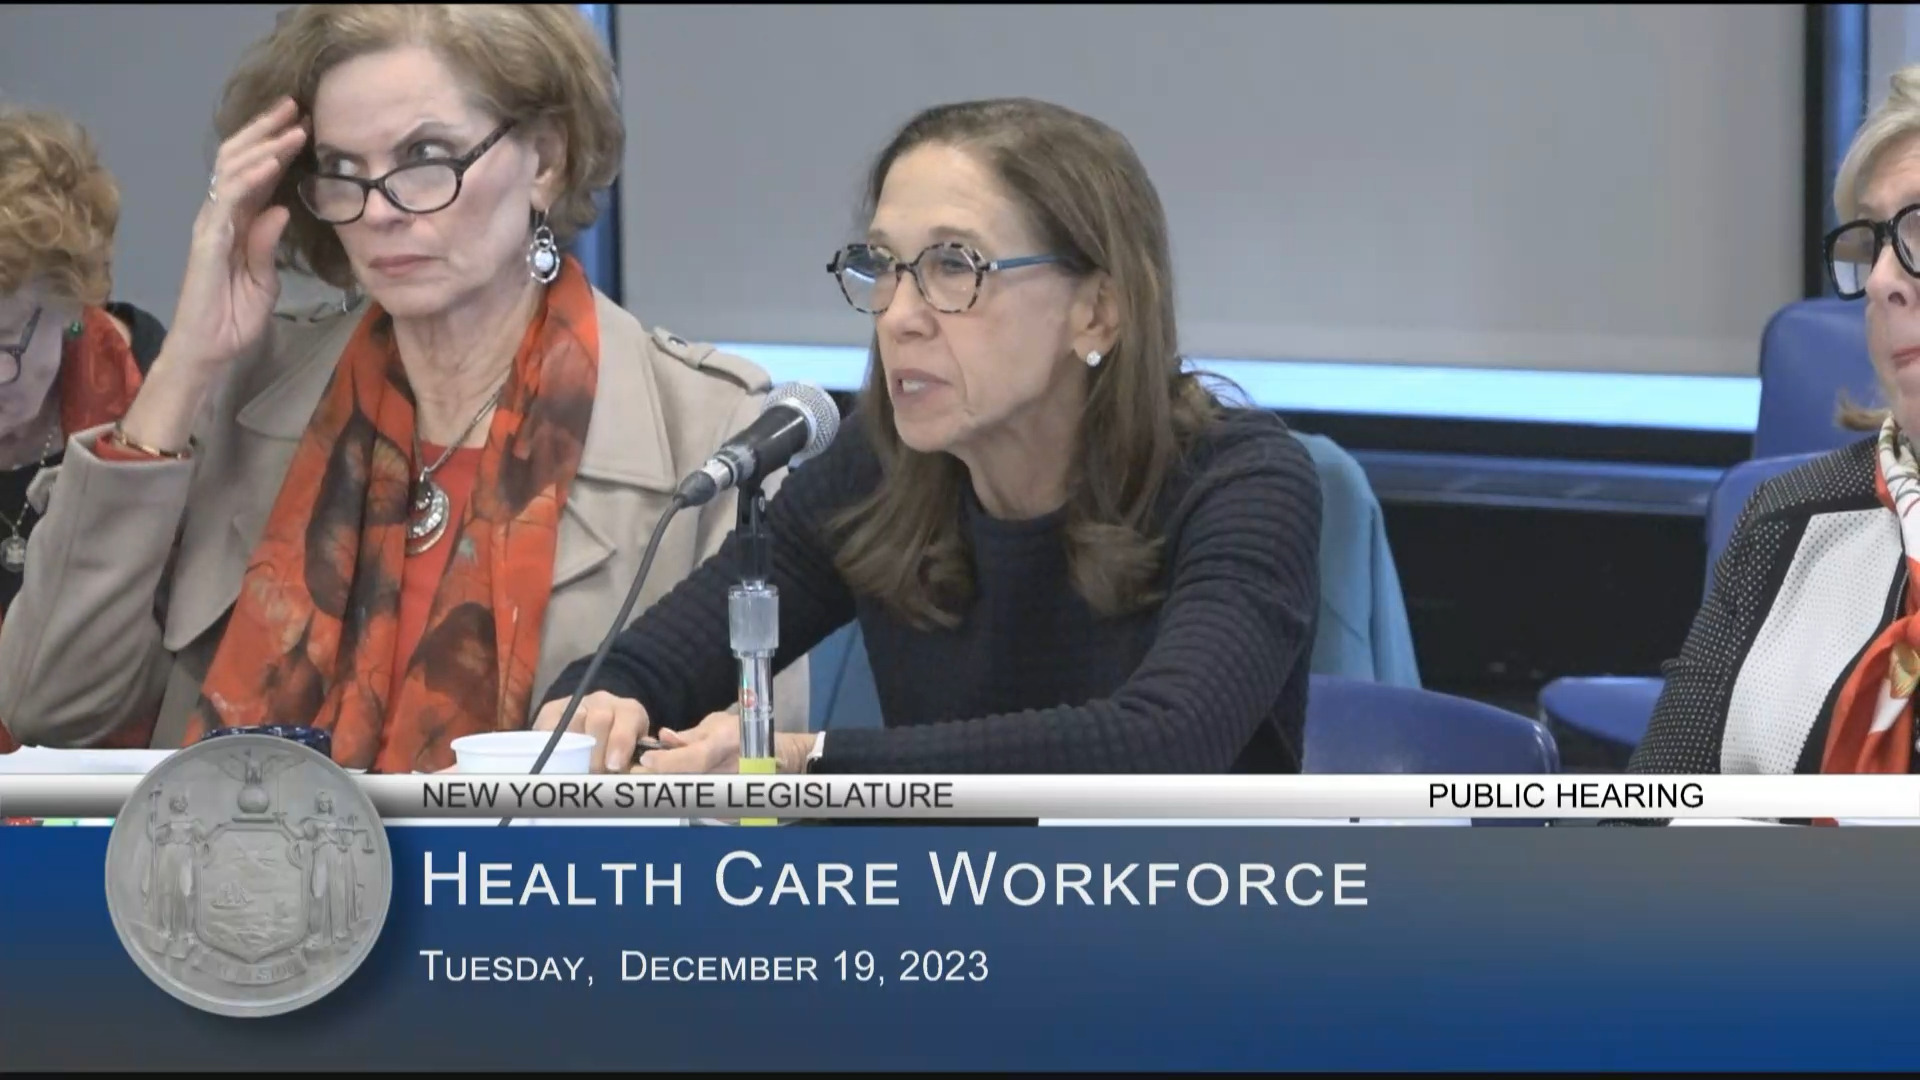 Medical Society of the State of NY President Testifies at Public Hearing on the Status of the Health Care Workforce in New York State